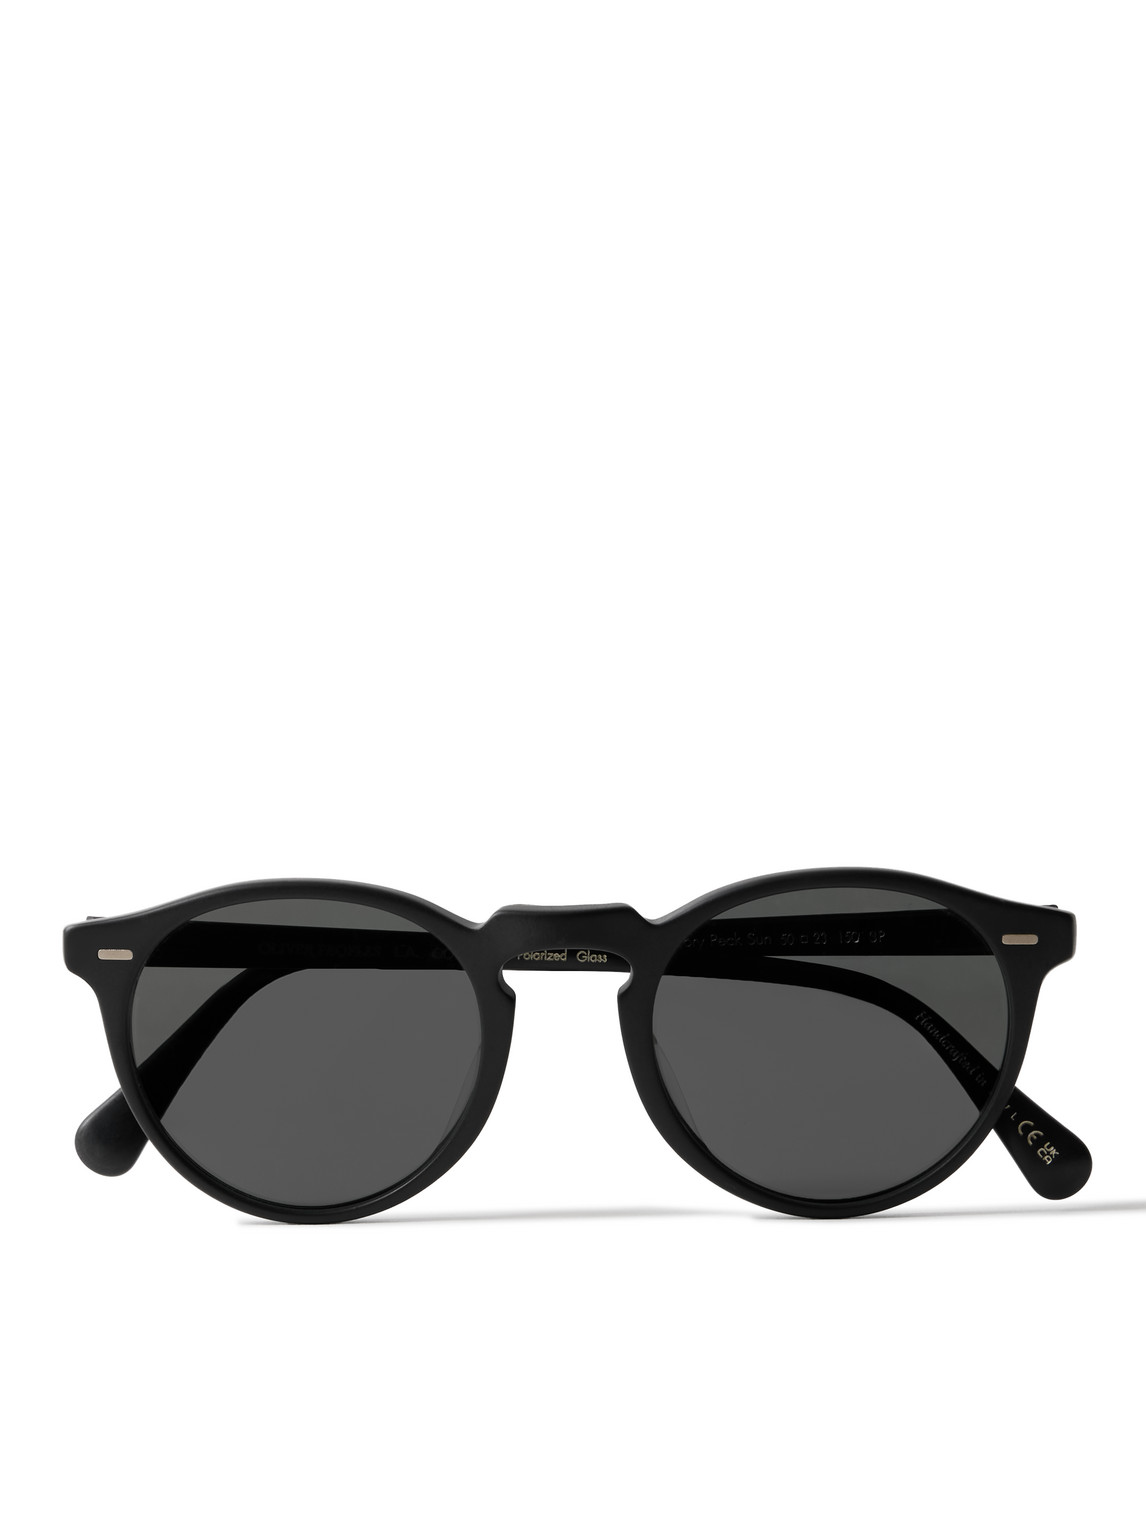 Oliver Peoples Gregory Peck Round-frame Acetate Sunglasses In Black